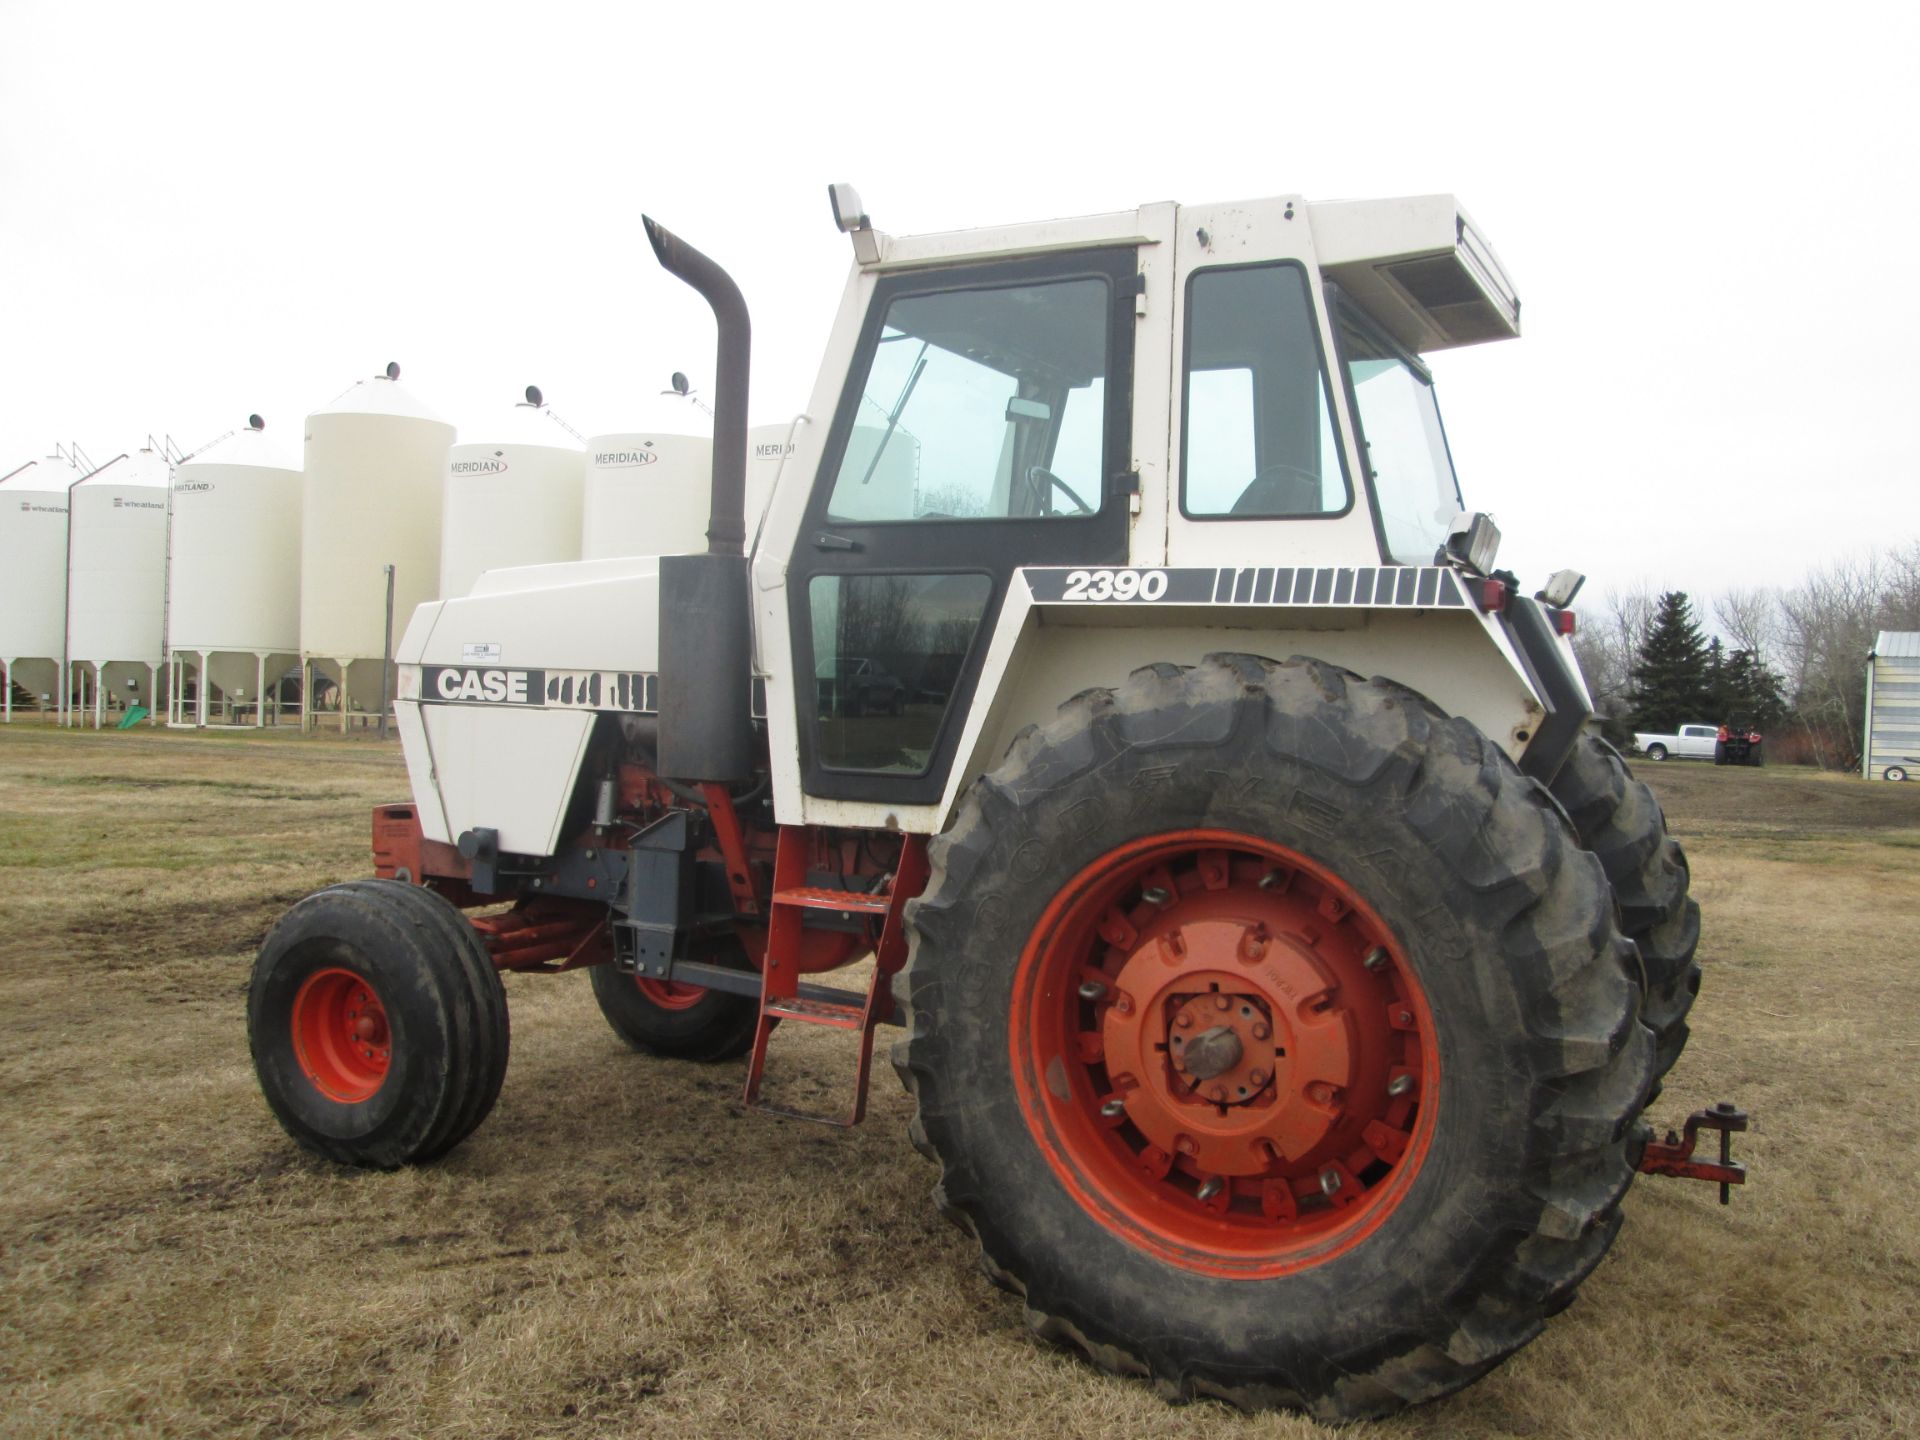 Case 2390 2WD c/w Allied 795 loader, 7' bucket & grapple, showing 6405 hr, 20.8x38 duals, 3 hyd, - Image 11 of 18